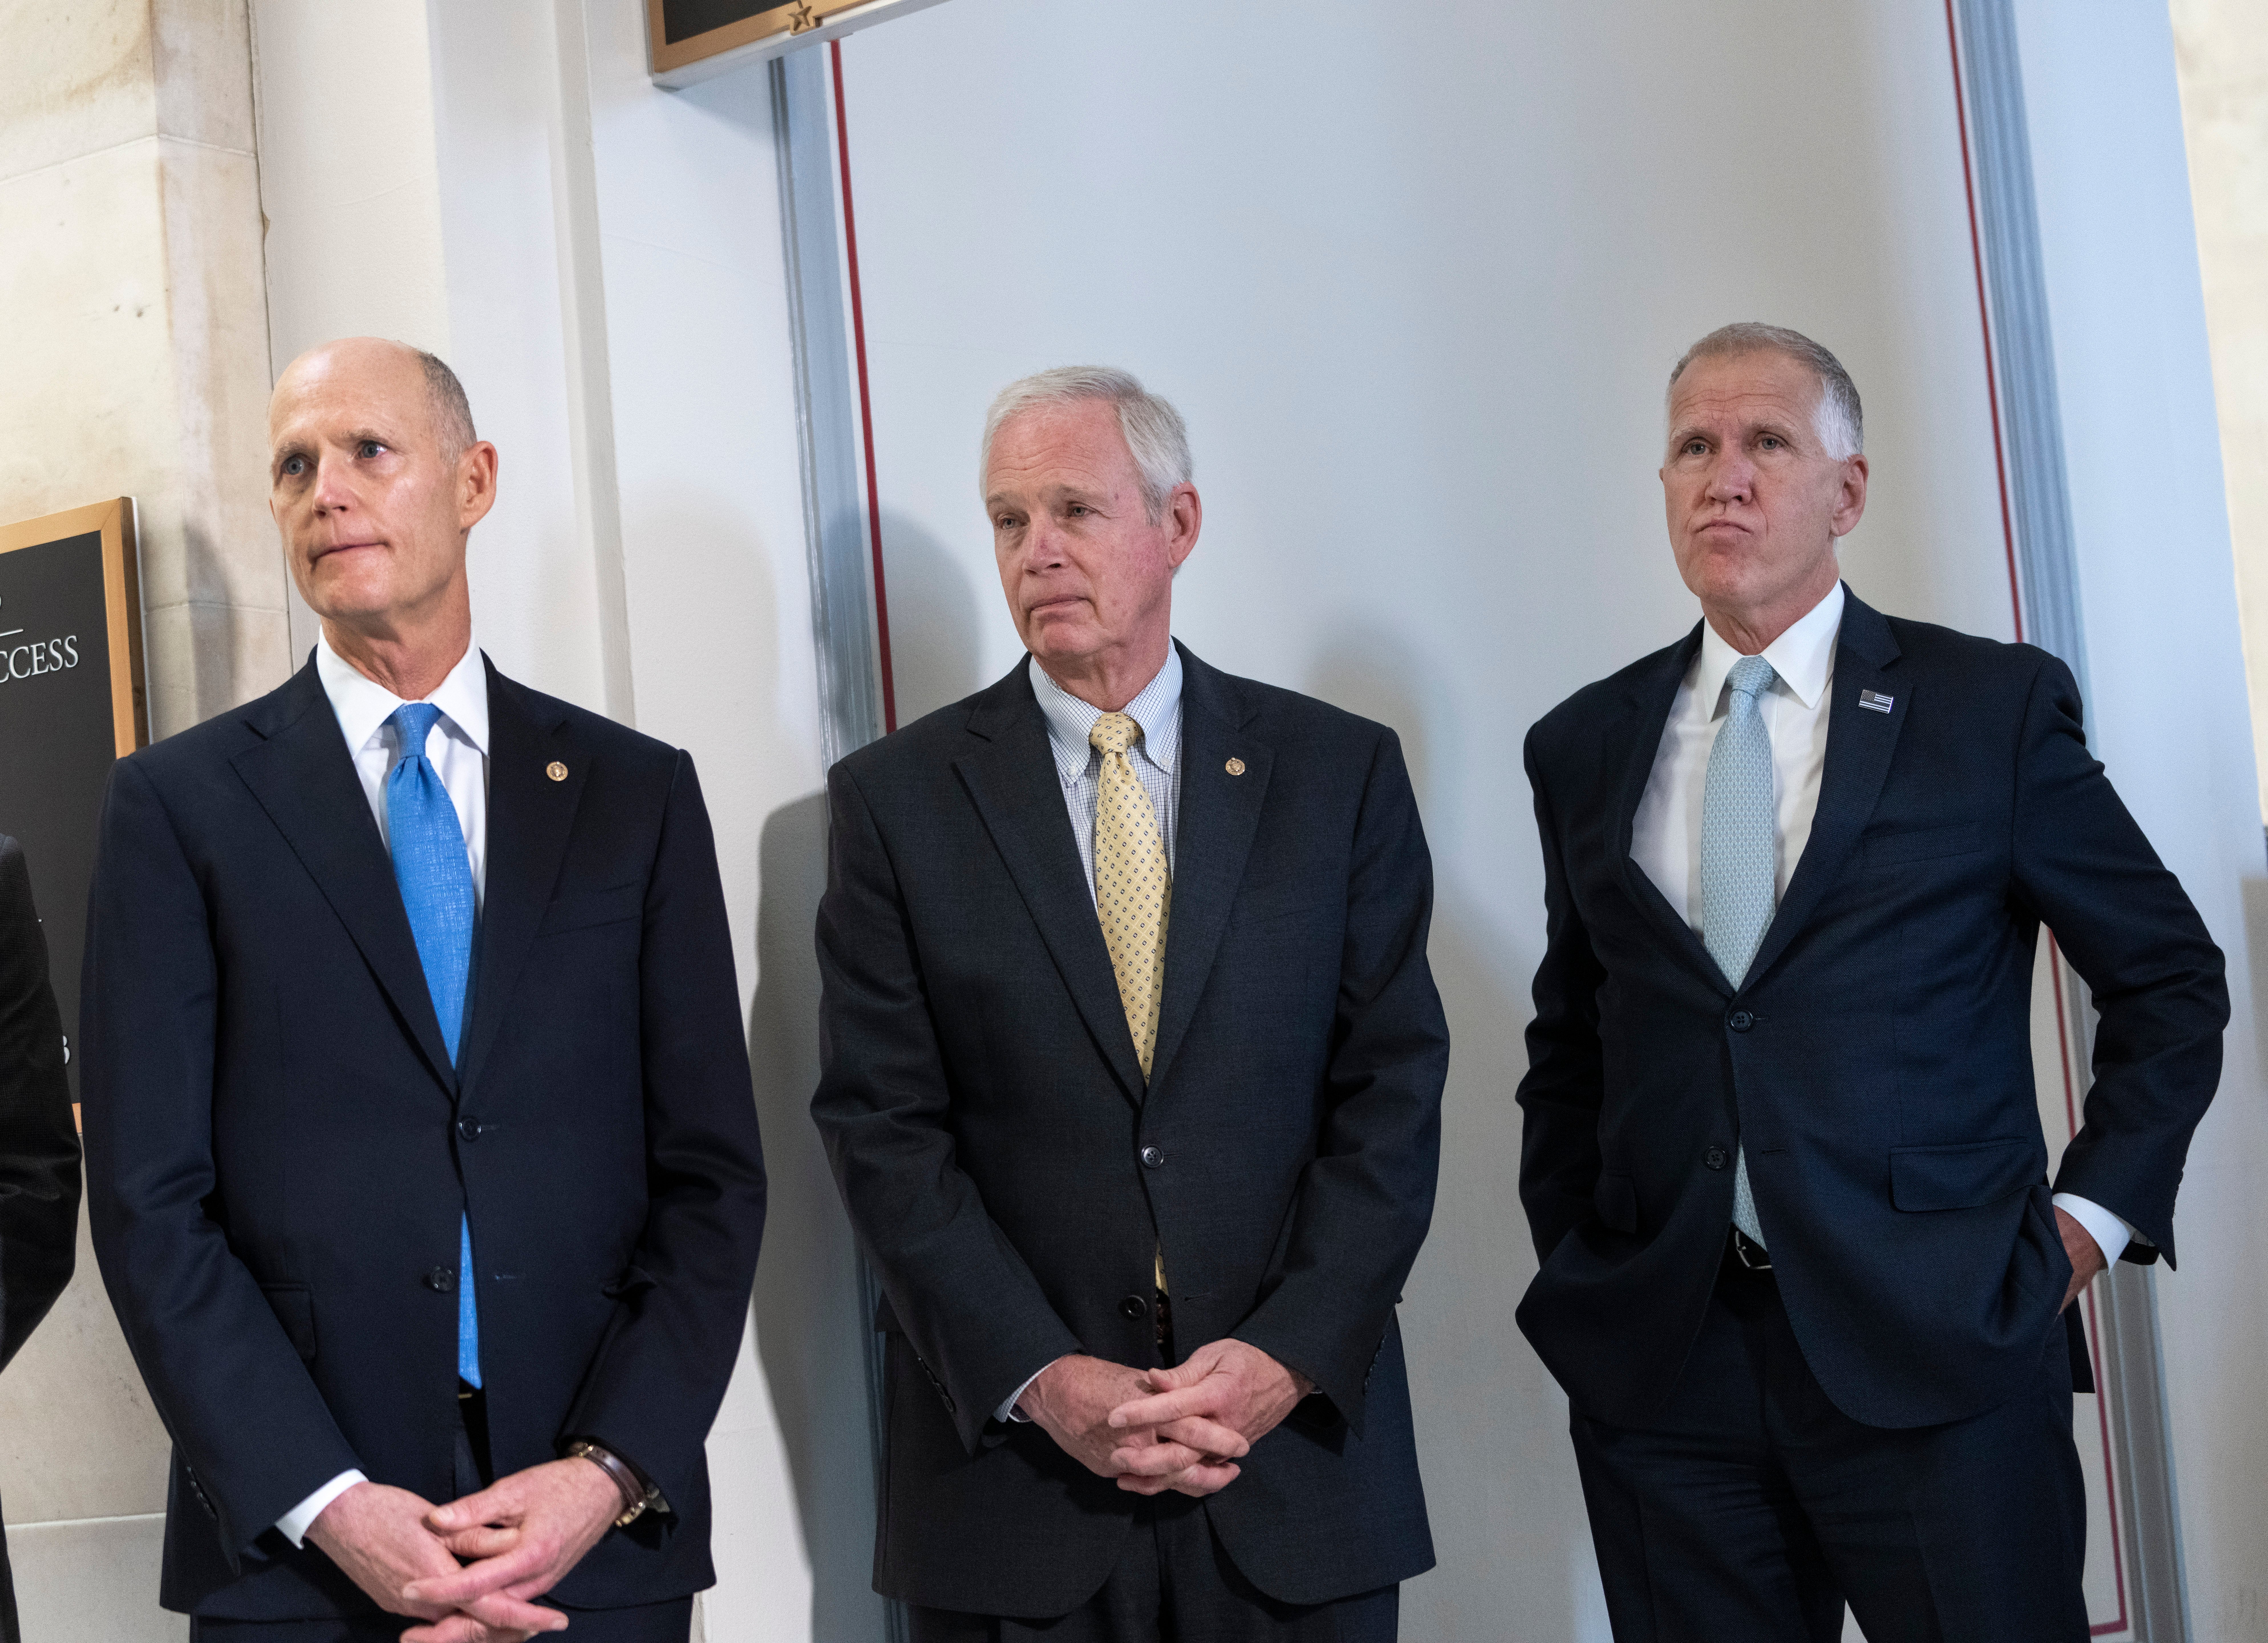 Republican senators Rick Scott, Ron Johnson and Thom Tillis all won their first Senate races in midterm elections, which resonated throughout the next decade